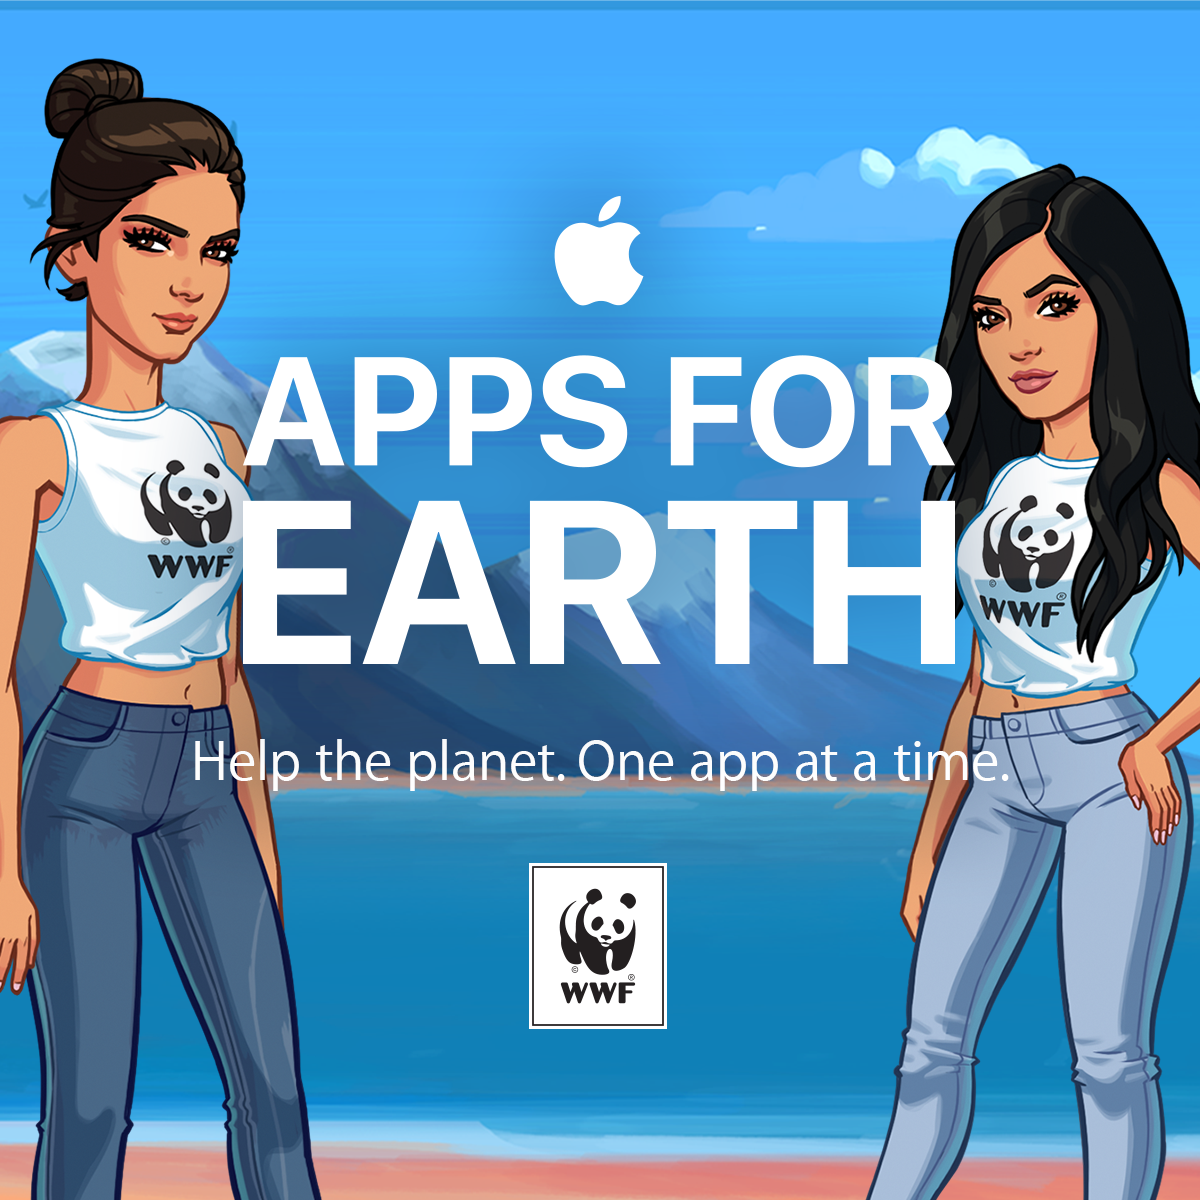 Our #KendallKylieGame is part of #AppsforEarth! Check out all the fun updates supporting WWF https://t.co/uOsrkXAWsJ https://t.co/Kfe4B1wOZ9